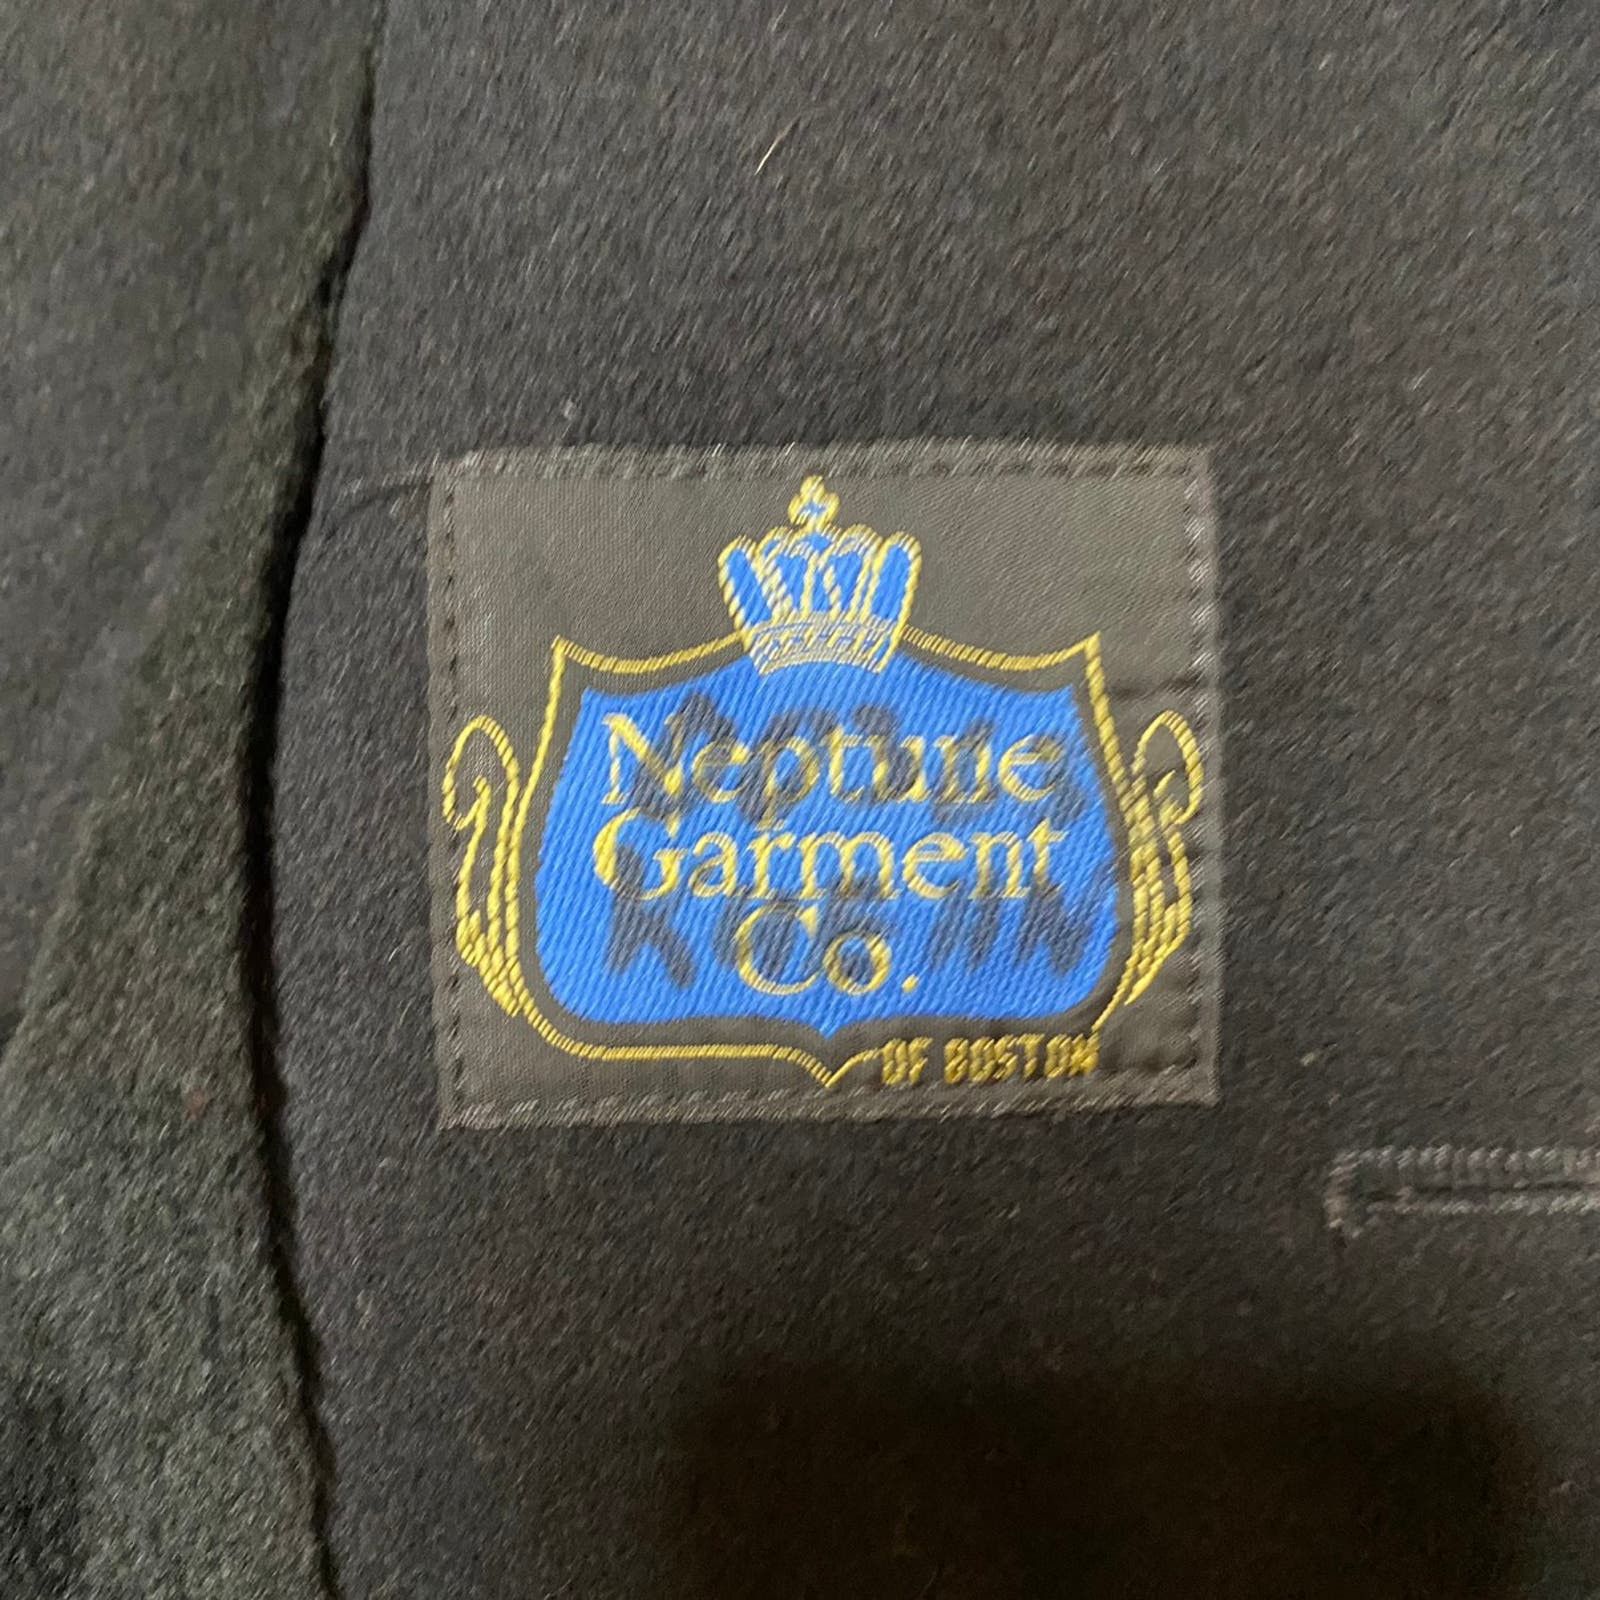 Other Neptune Garment Co Black Wool Military Pea Coat Size Small Size US S / EU 44-46 / 1 - 6 Thumbnail